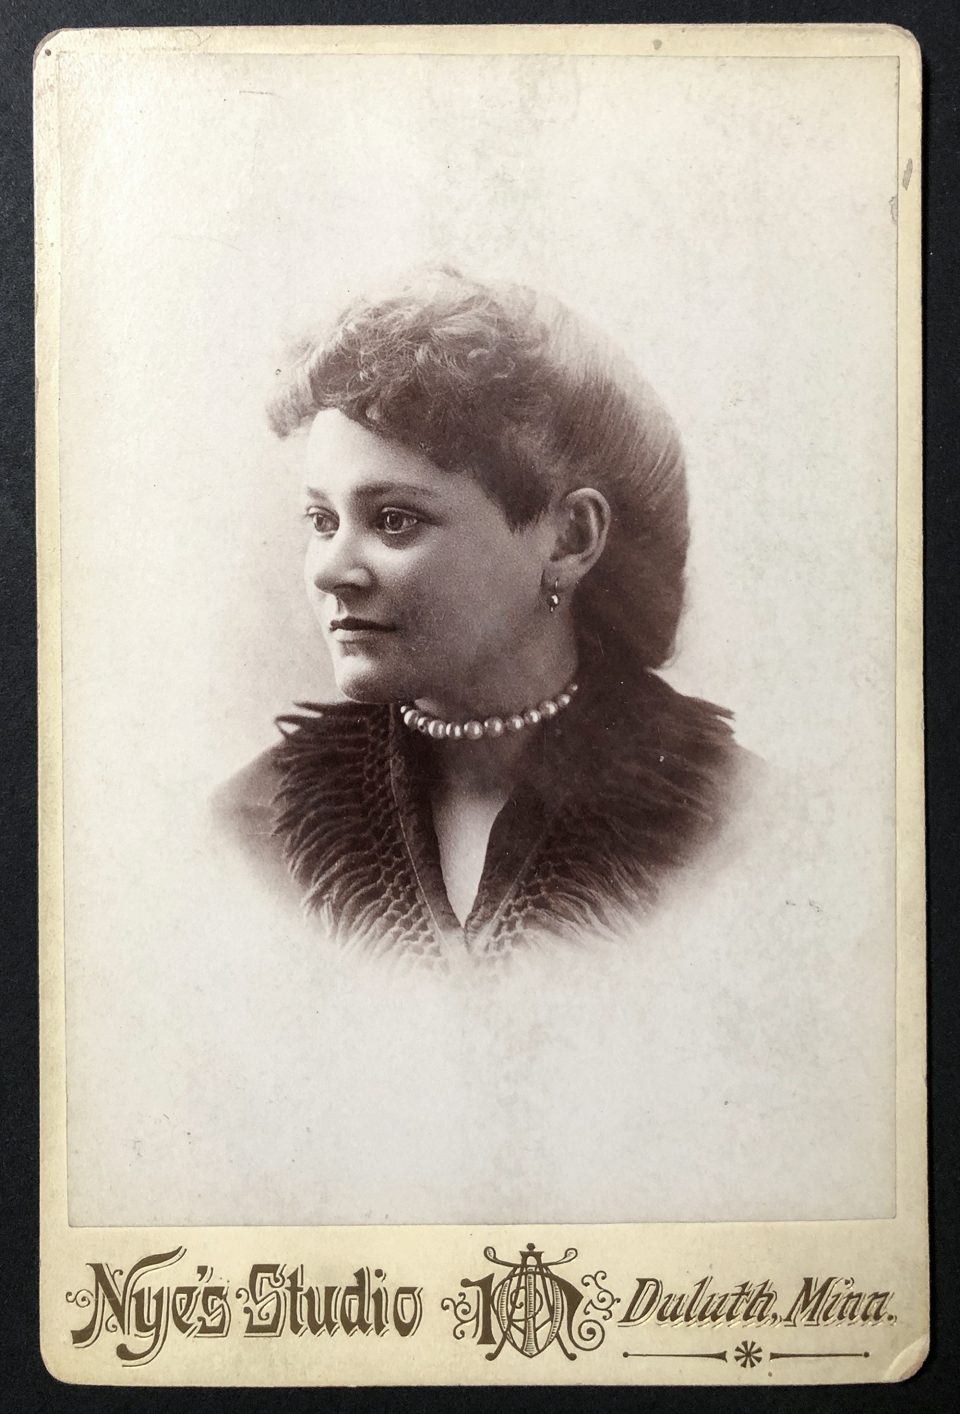 Head and shoulders portrait with a vignette effect of a young woman with a pearl necklace and fringed collar, made by the Nye's Studio of Duluth, Minnesota